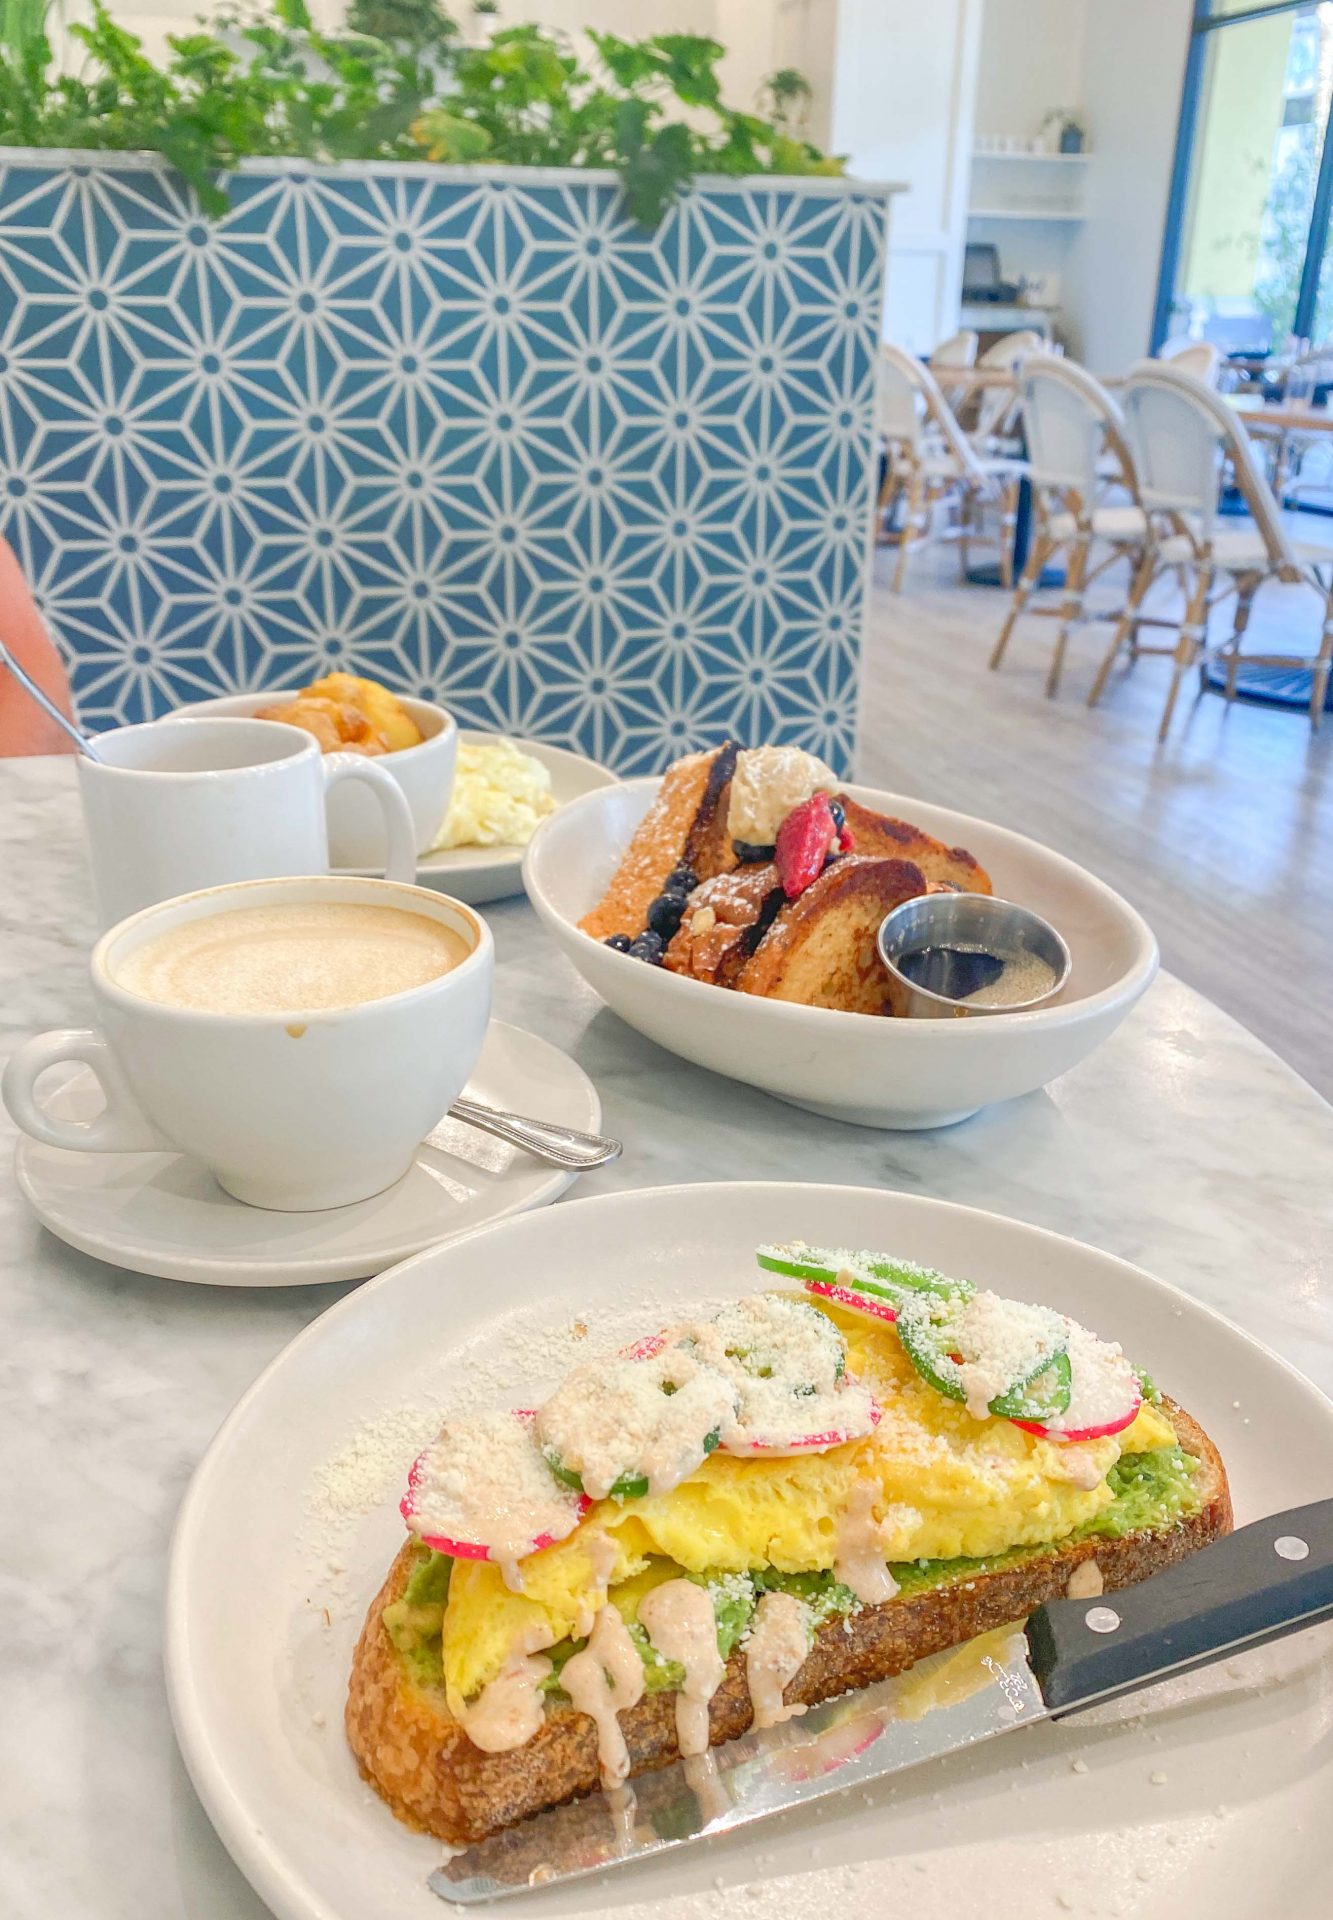 Prep and Pastry, Breakfast in Scottsdale Arizona, Ultimate Travel Guide, Scottsdale AZ, Travel USA, Brunch Spots, Best Coffee Shops in Scottsdale, What to do in Scottsdale, Where to Eat in Scottsdale, travel blogger, photography